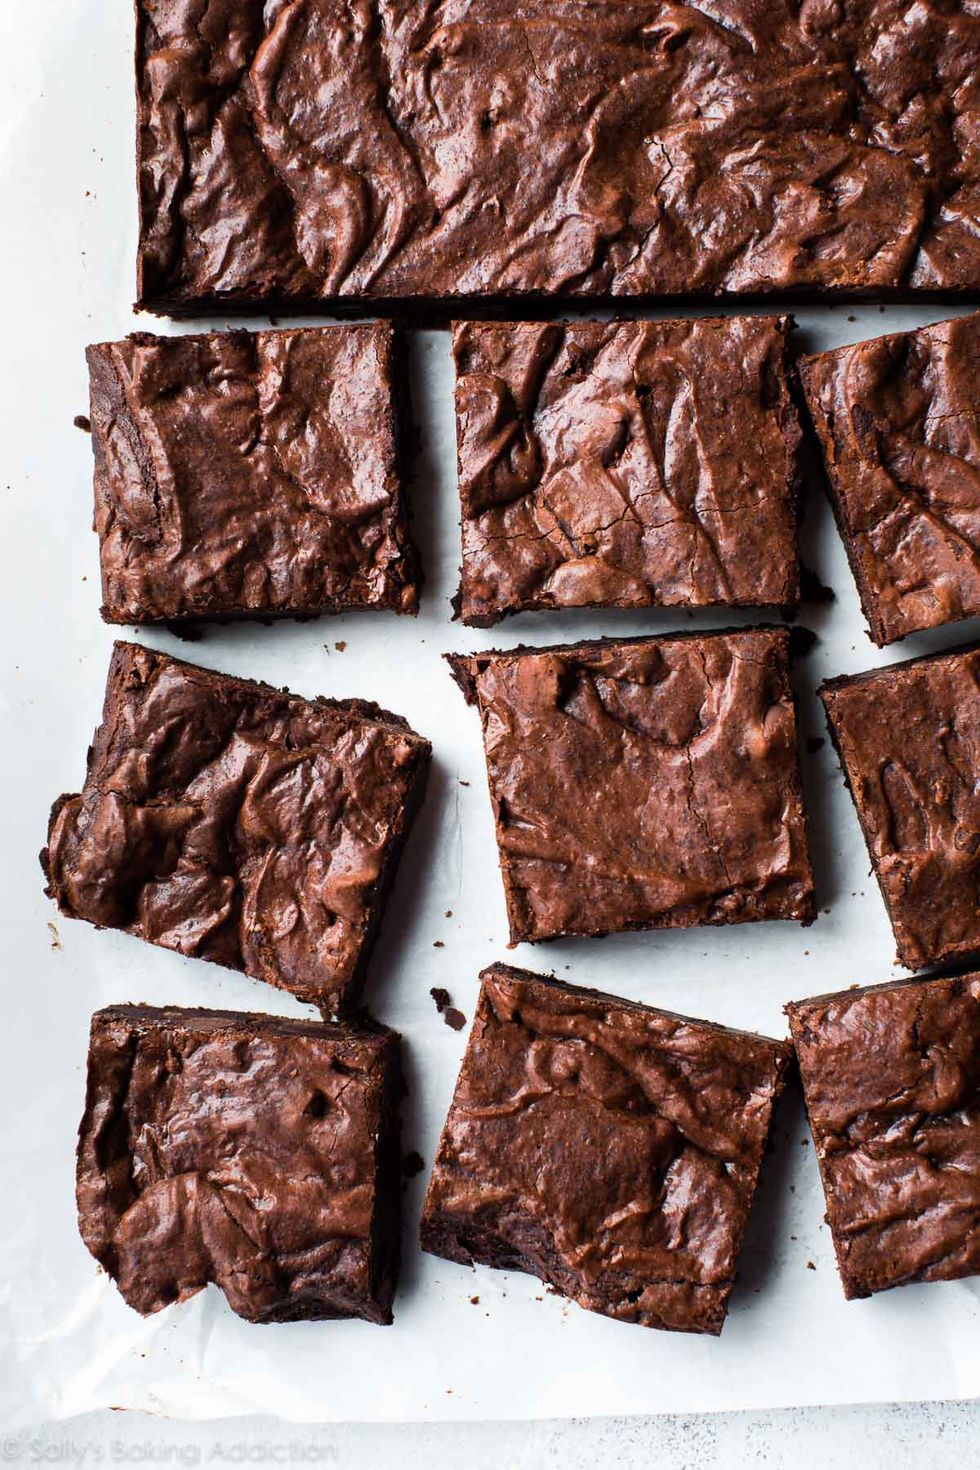 This Week In Weird News: Are Laxative Laced Brownies The Ideal Send-Off Gift?